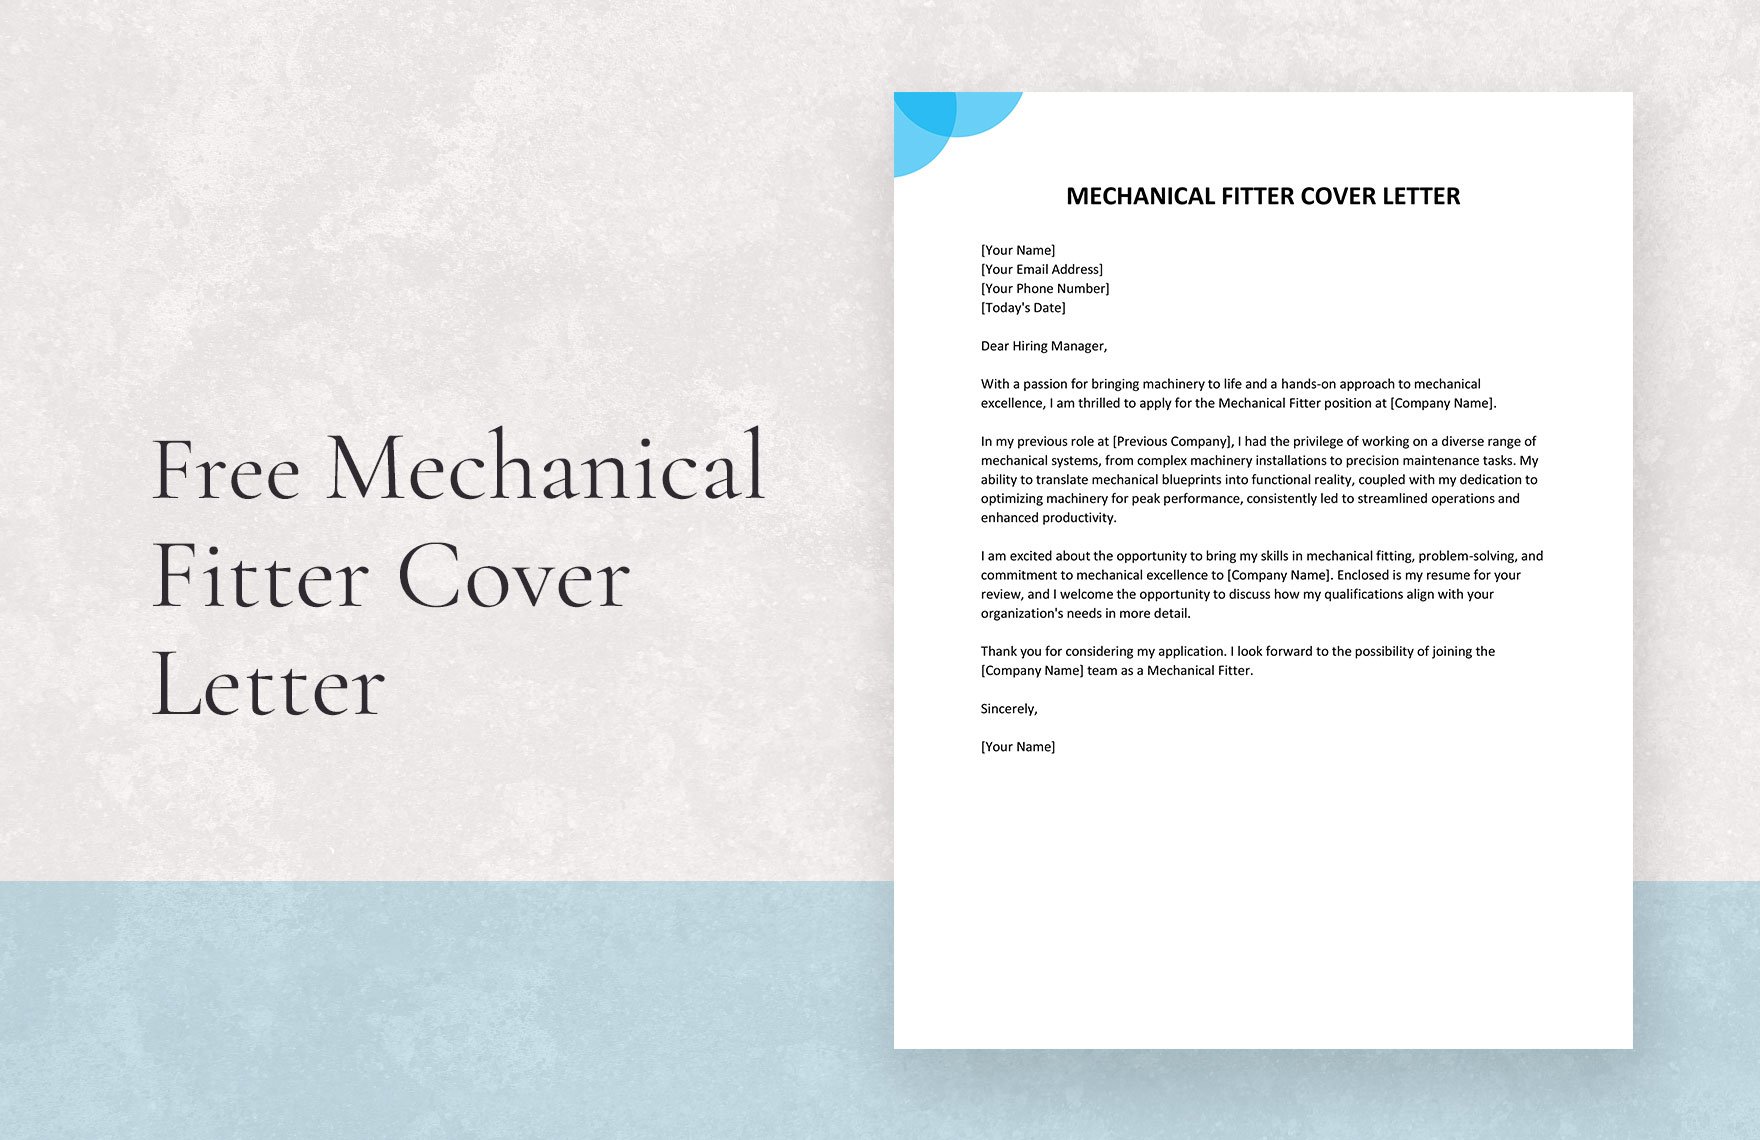 Mechanical Fitter Cover Letter in Word, Google Docs